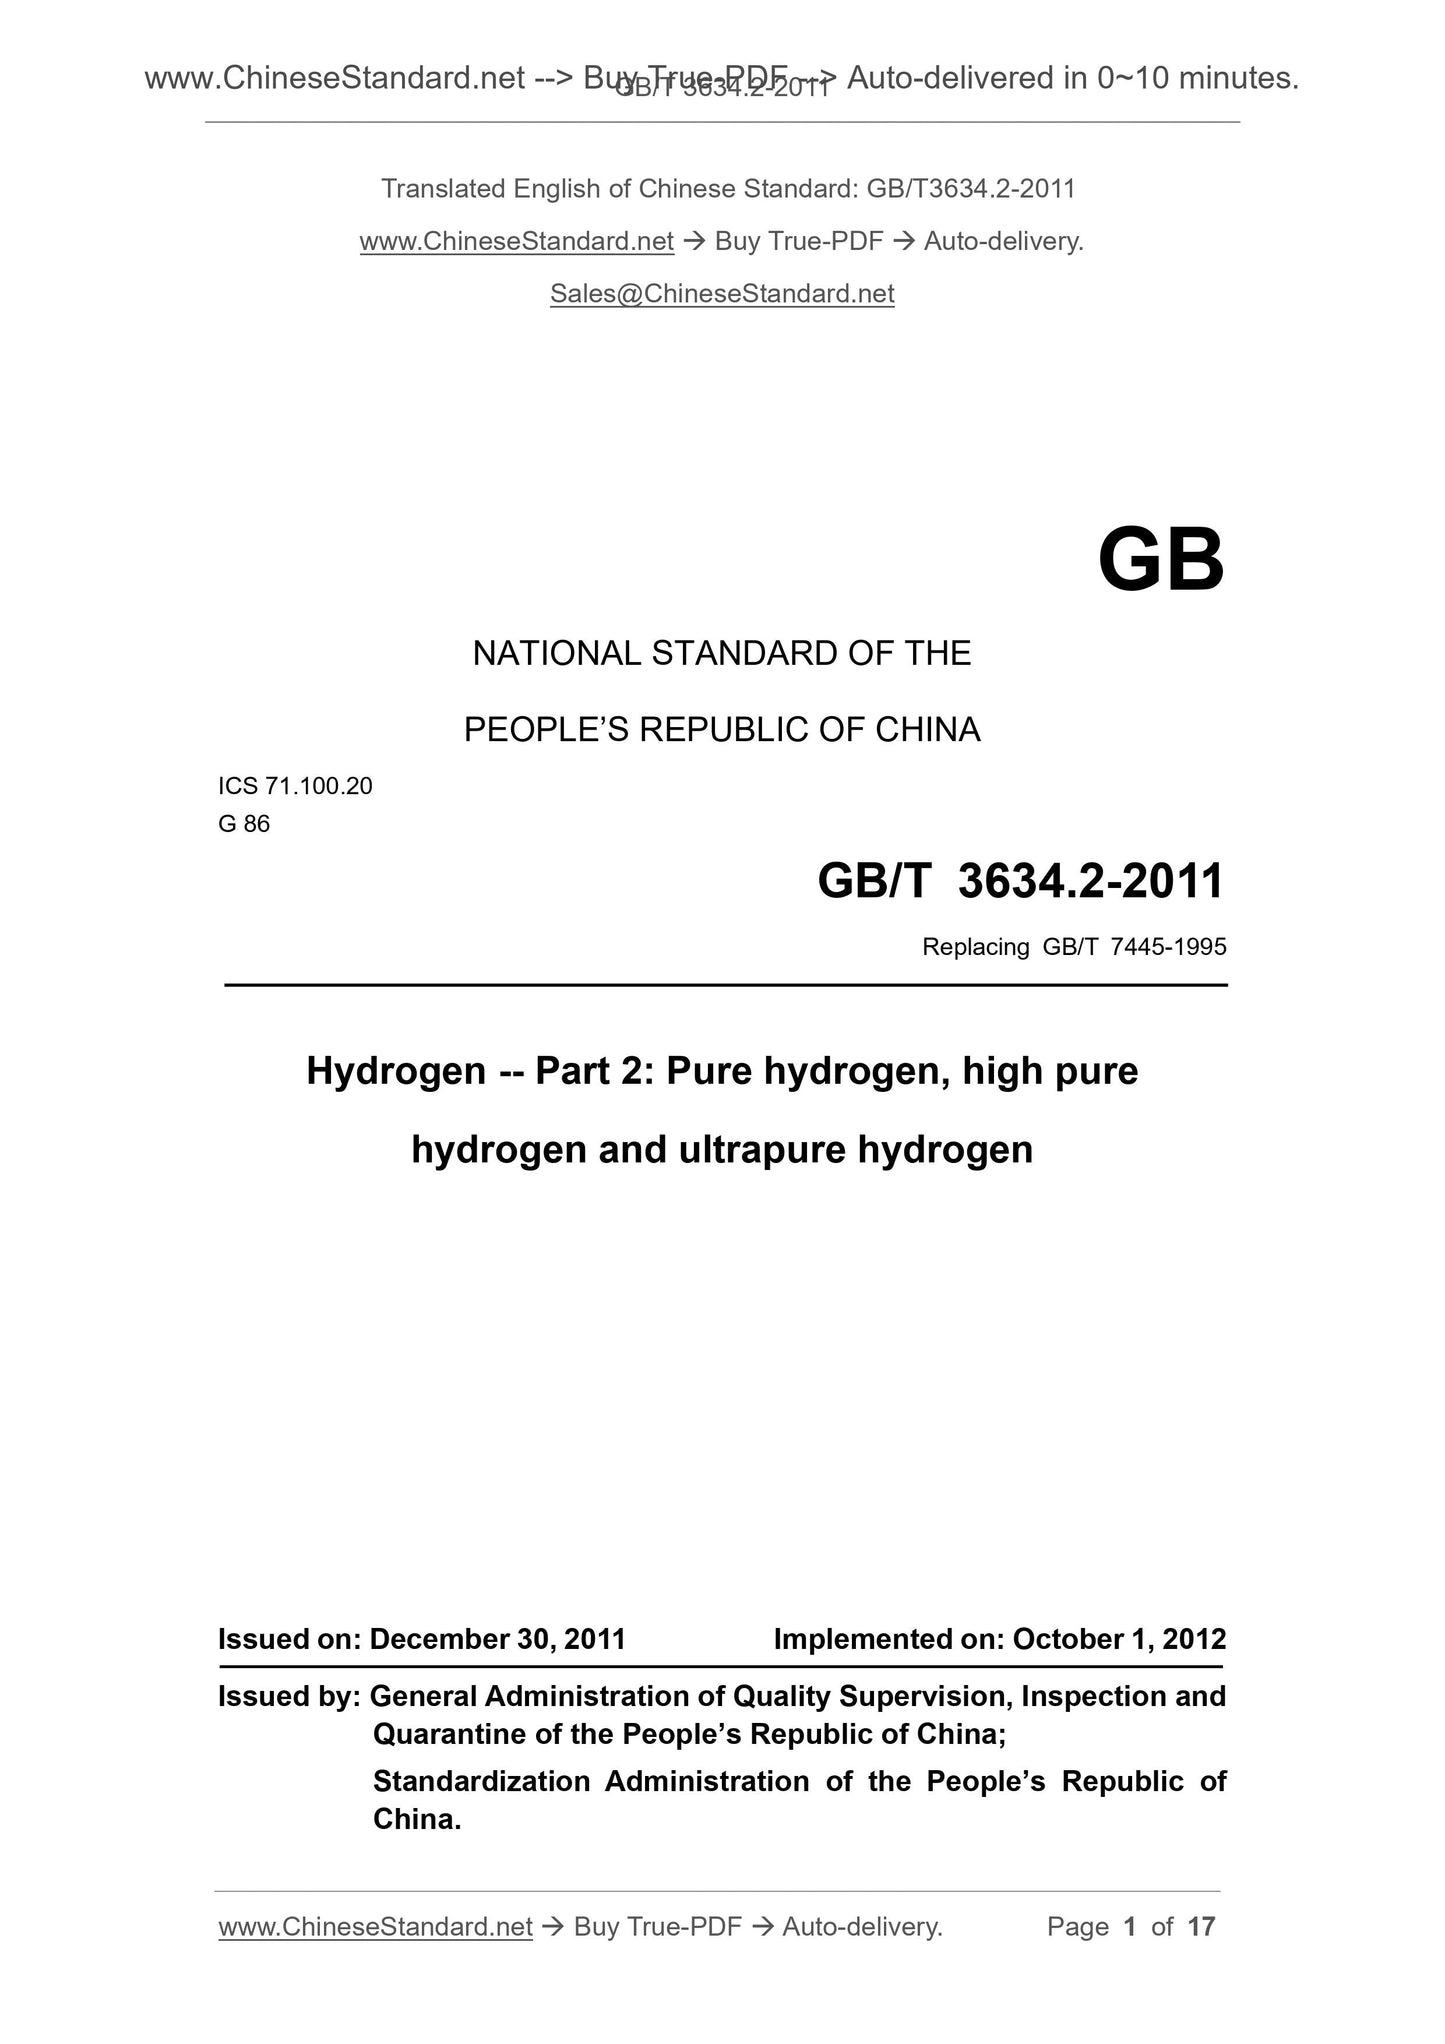 GB/T 3634.2-2011 Page 1